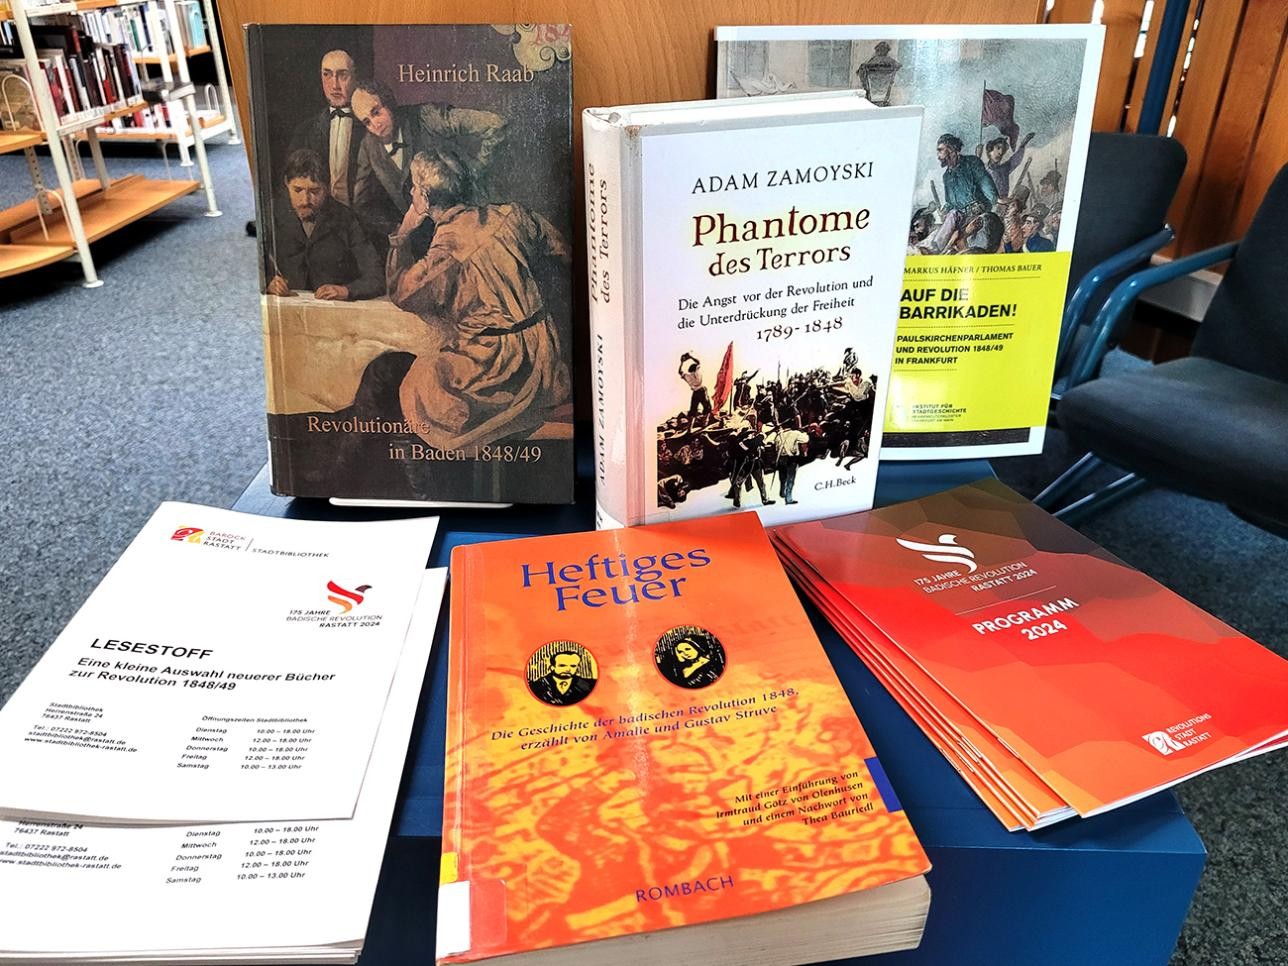 Books from the exhibition in the Rastatt City Library on 175 years of the Baden Revolution